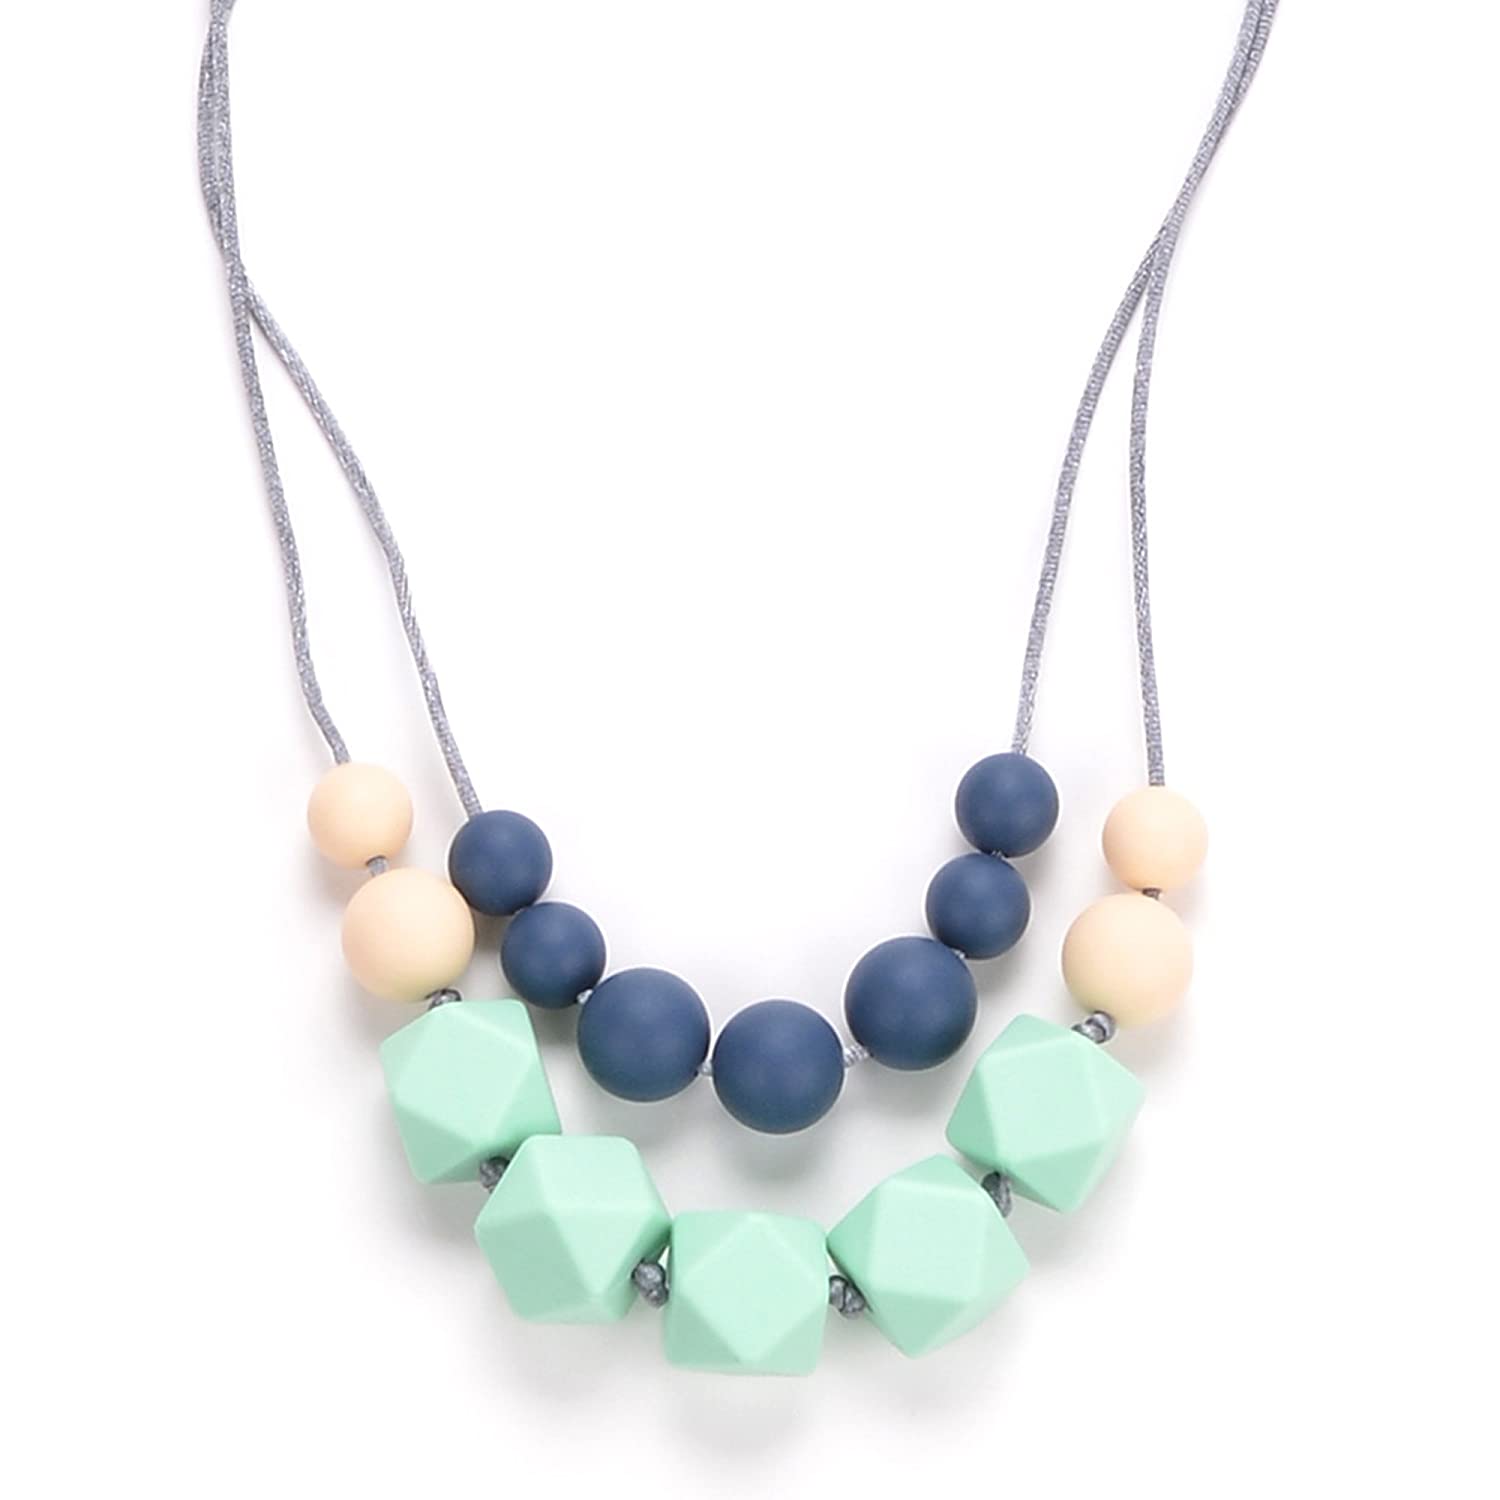 Bebe by Me 'Harper' Hard + Soft + Cushy Beads All-in-1 Teething Necklace for Nursing Moms